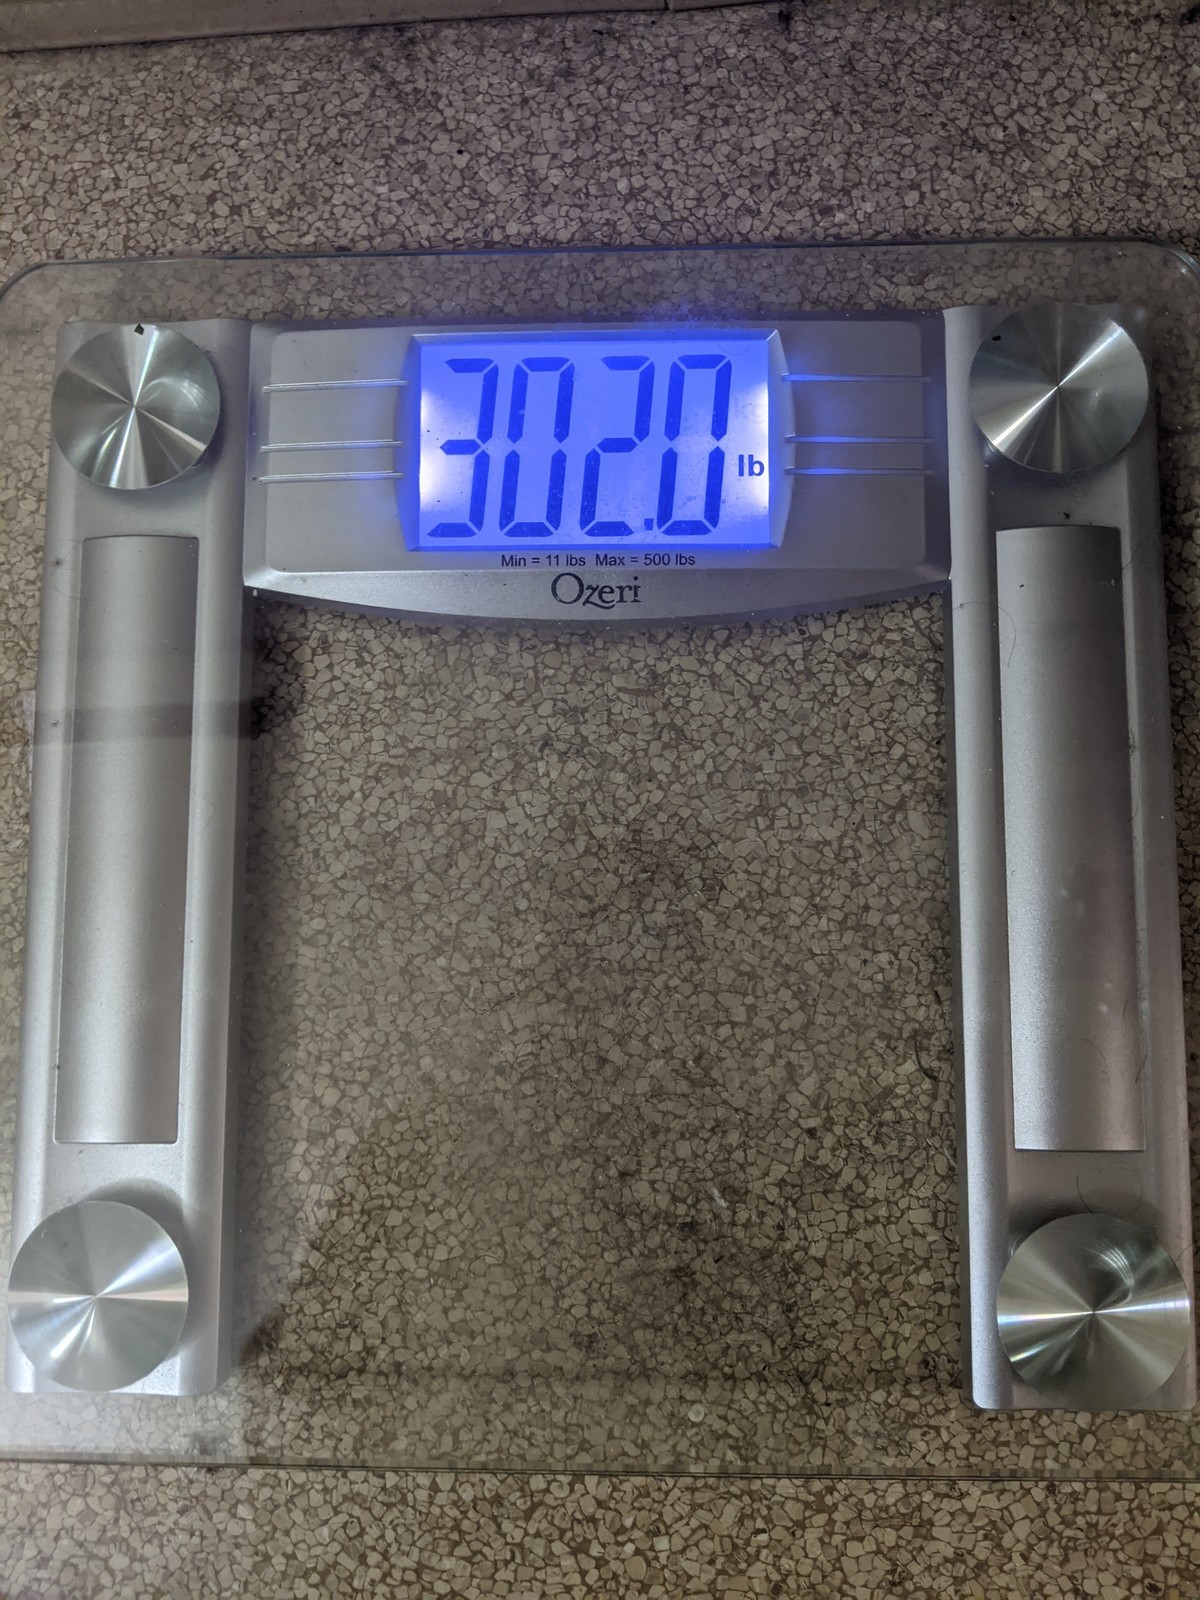 Oct 2020 weight log. join list: WeightlossProgress (168 subs)Mention History So it seems I will probably either be at 300 or just below 300 for my next weight l